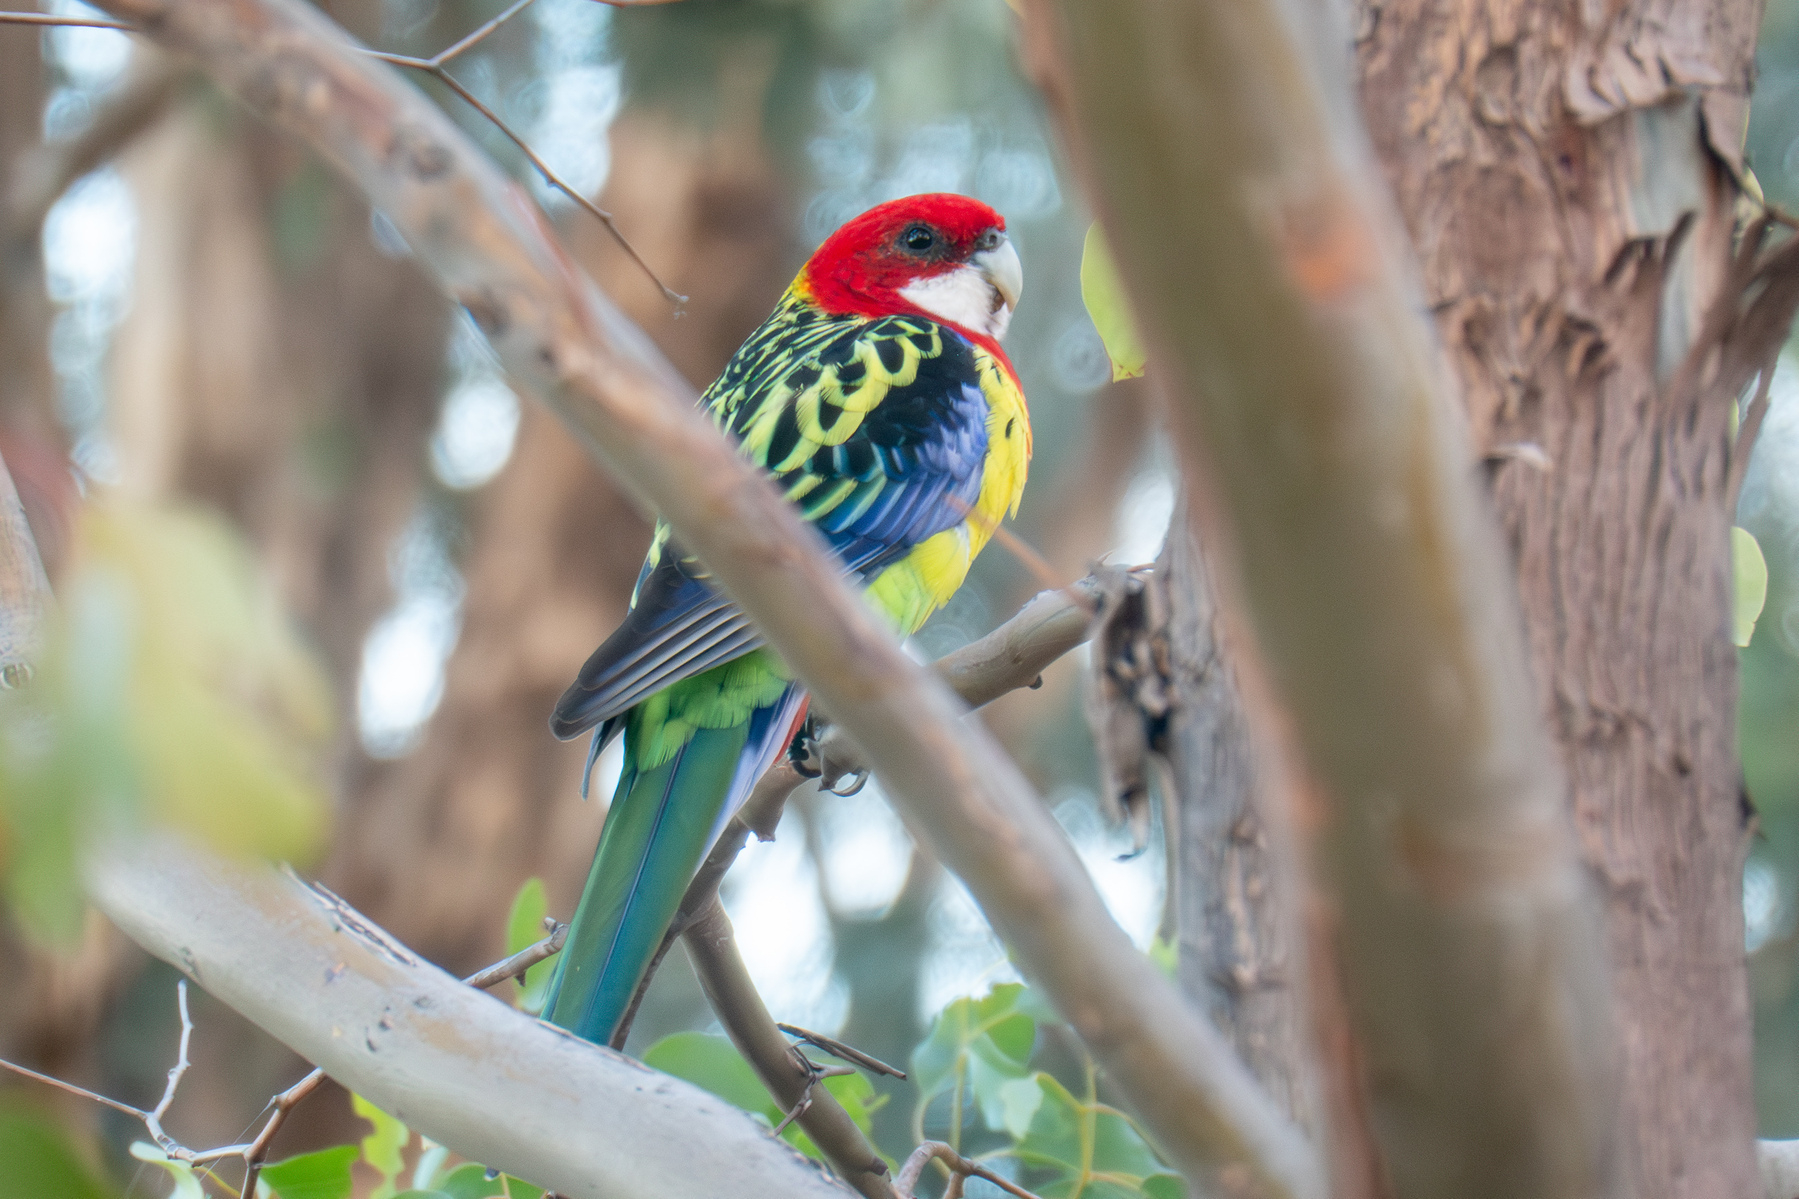 A rosella in a tree, looking at the camera.